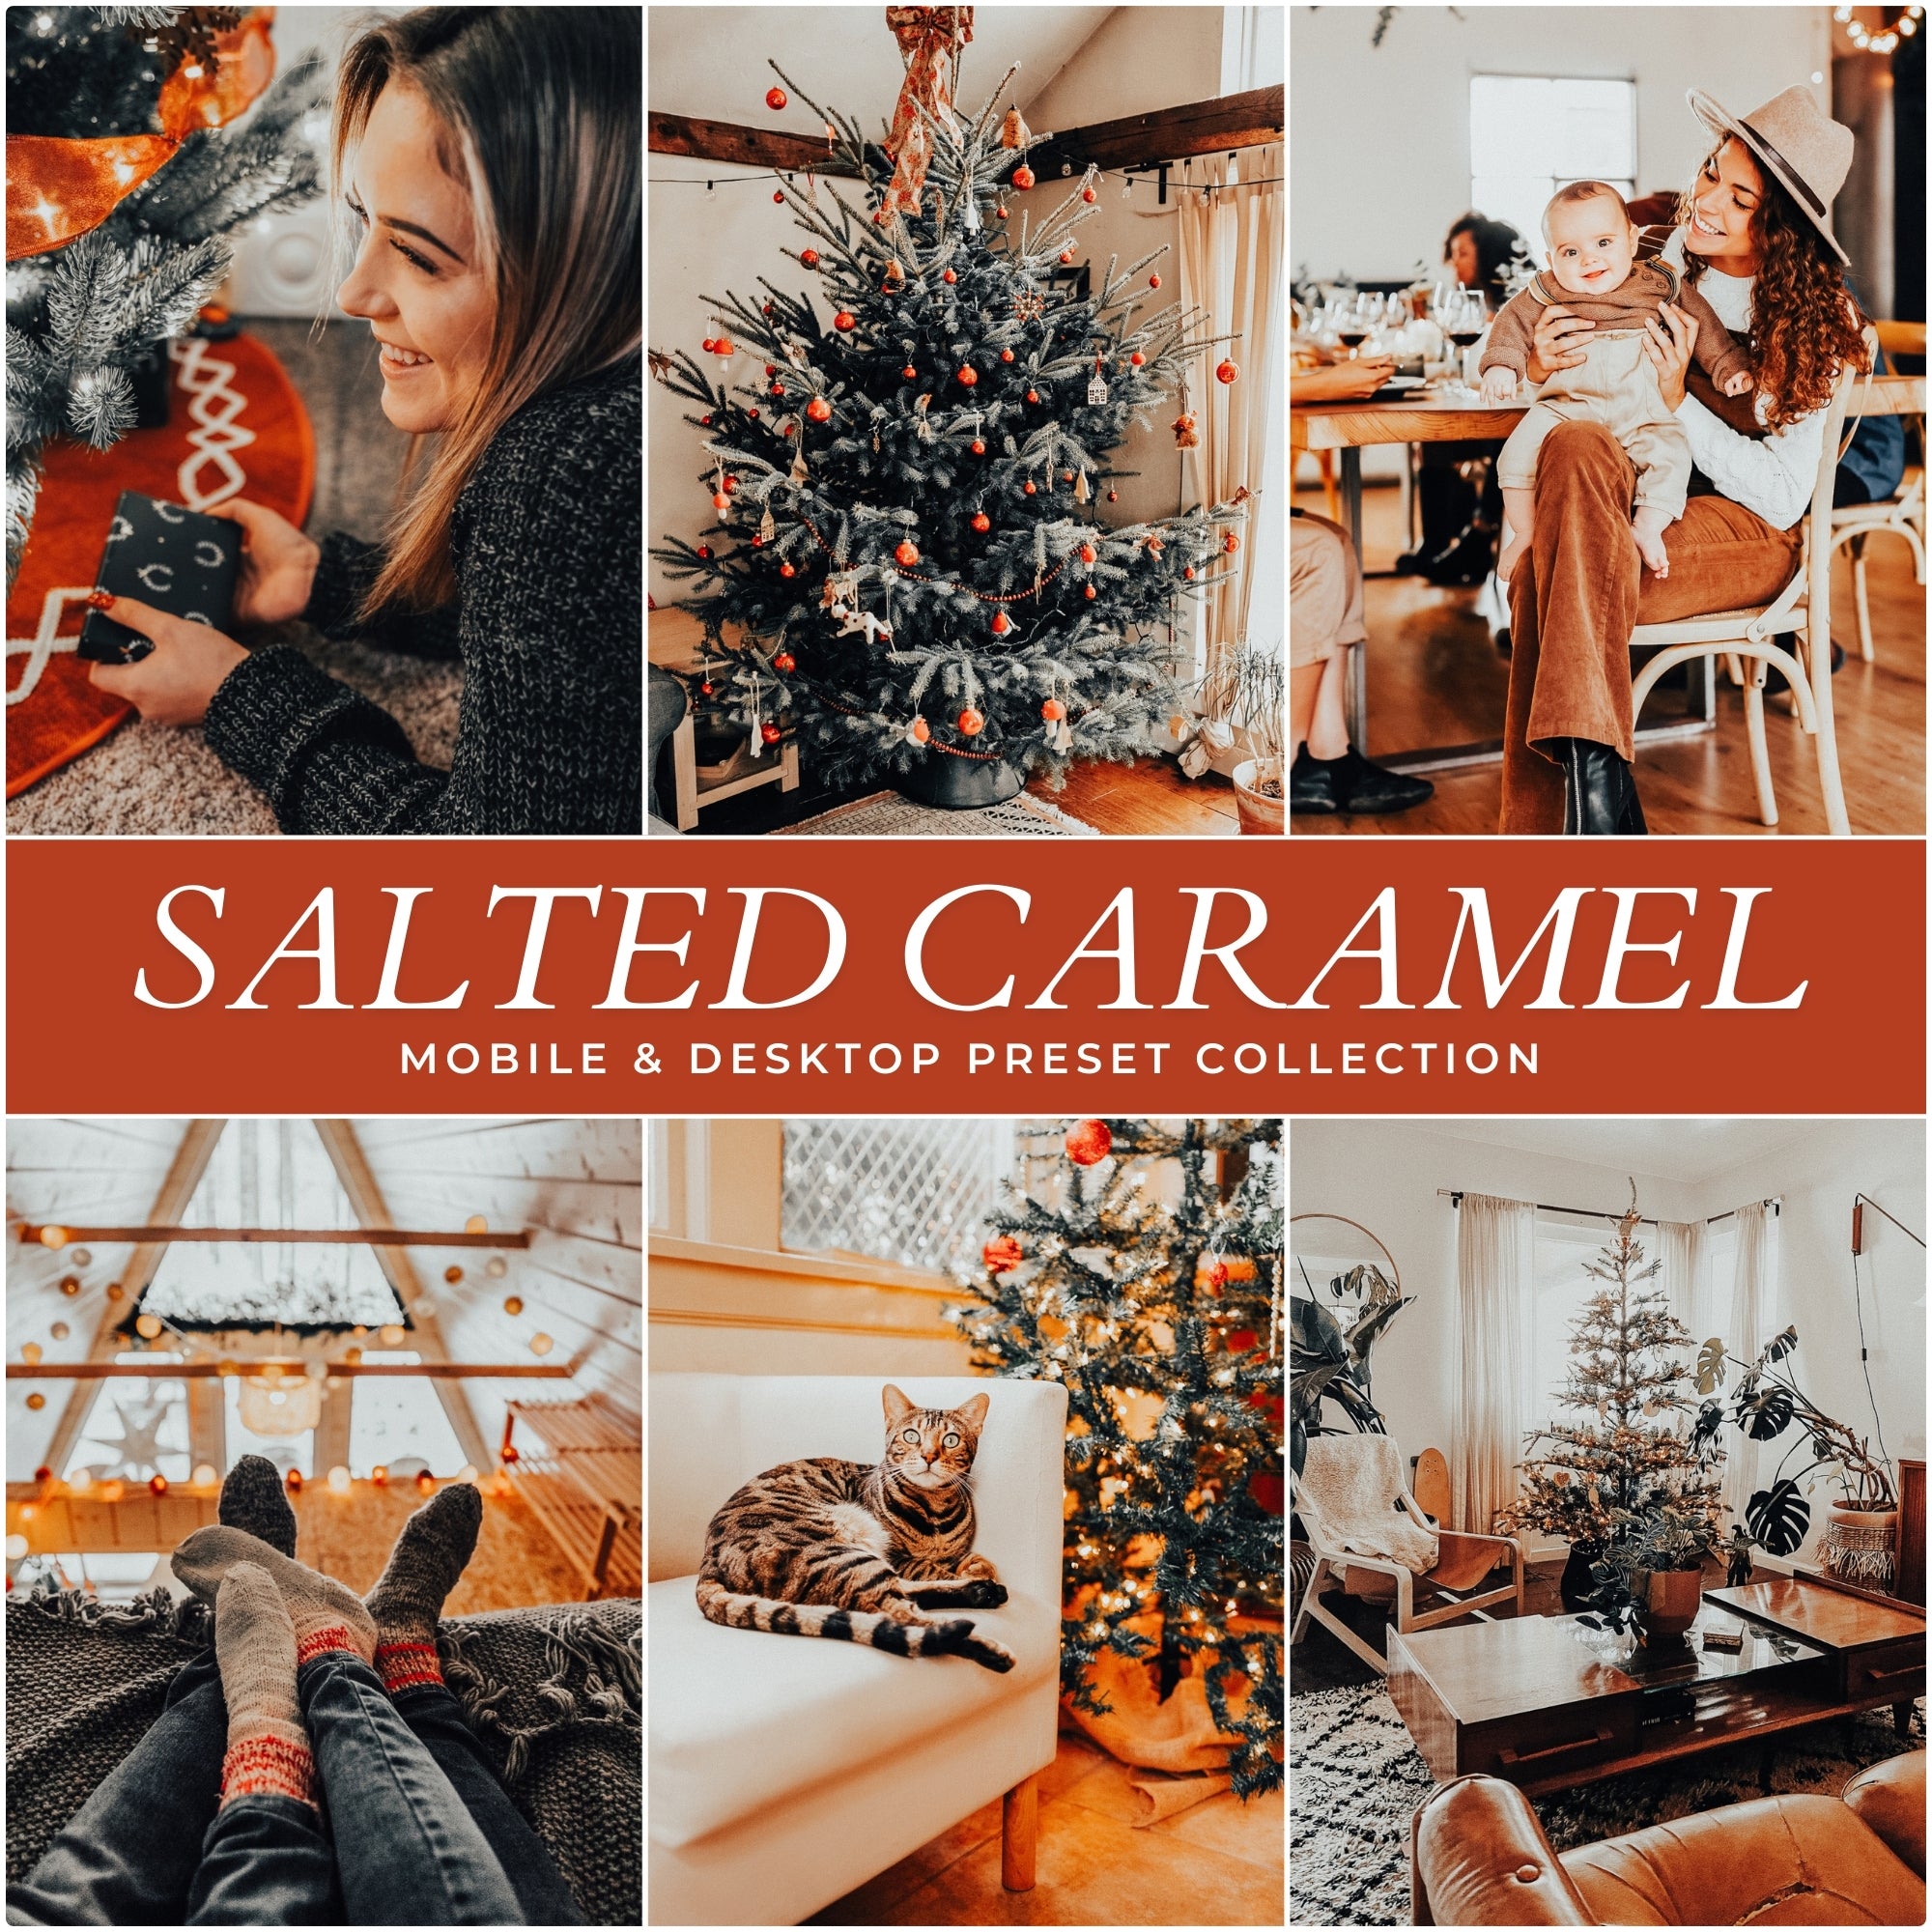 Indoor Christmas Lightroom Presets The Best Photo Editing Preset Filters For Christmas And Winter Holiday Photos with Adobe Lightroom Mobile And Desktop For Photographers and Instagram Influencers By Lou And Marks Presets